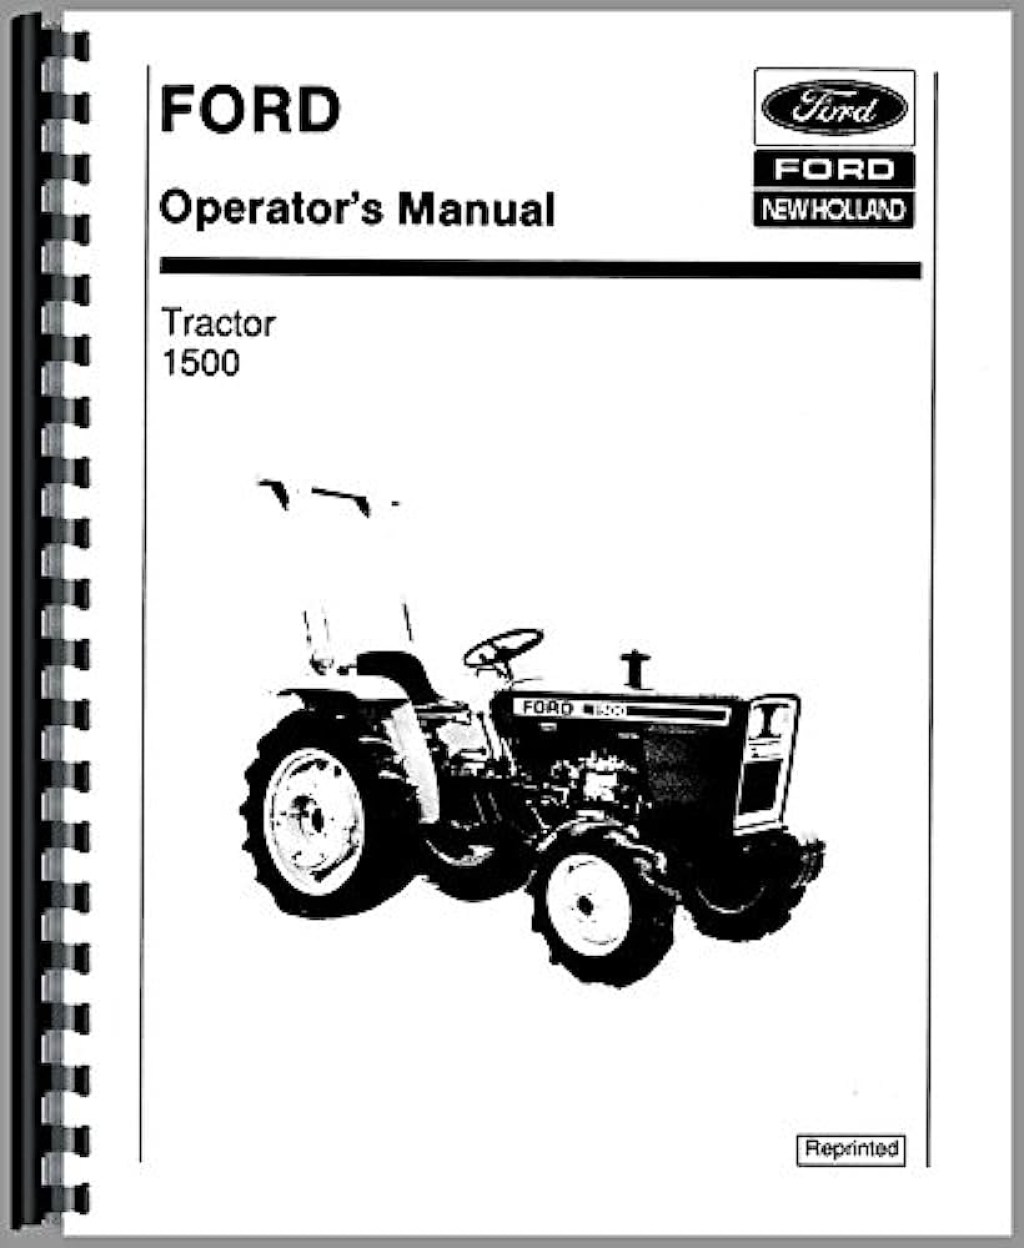 Picture of: Ford  Tractor Operators Manual: Ford: : Amazon